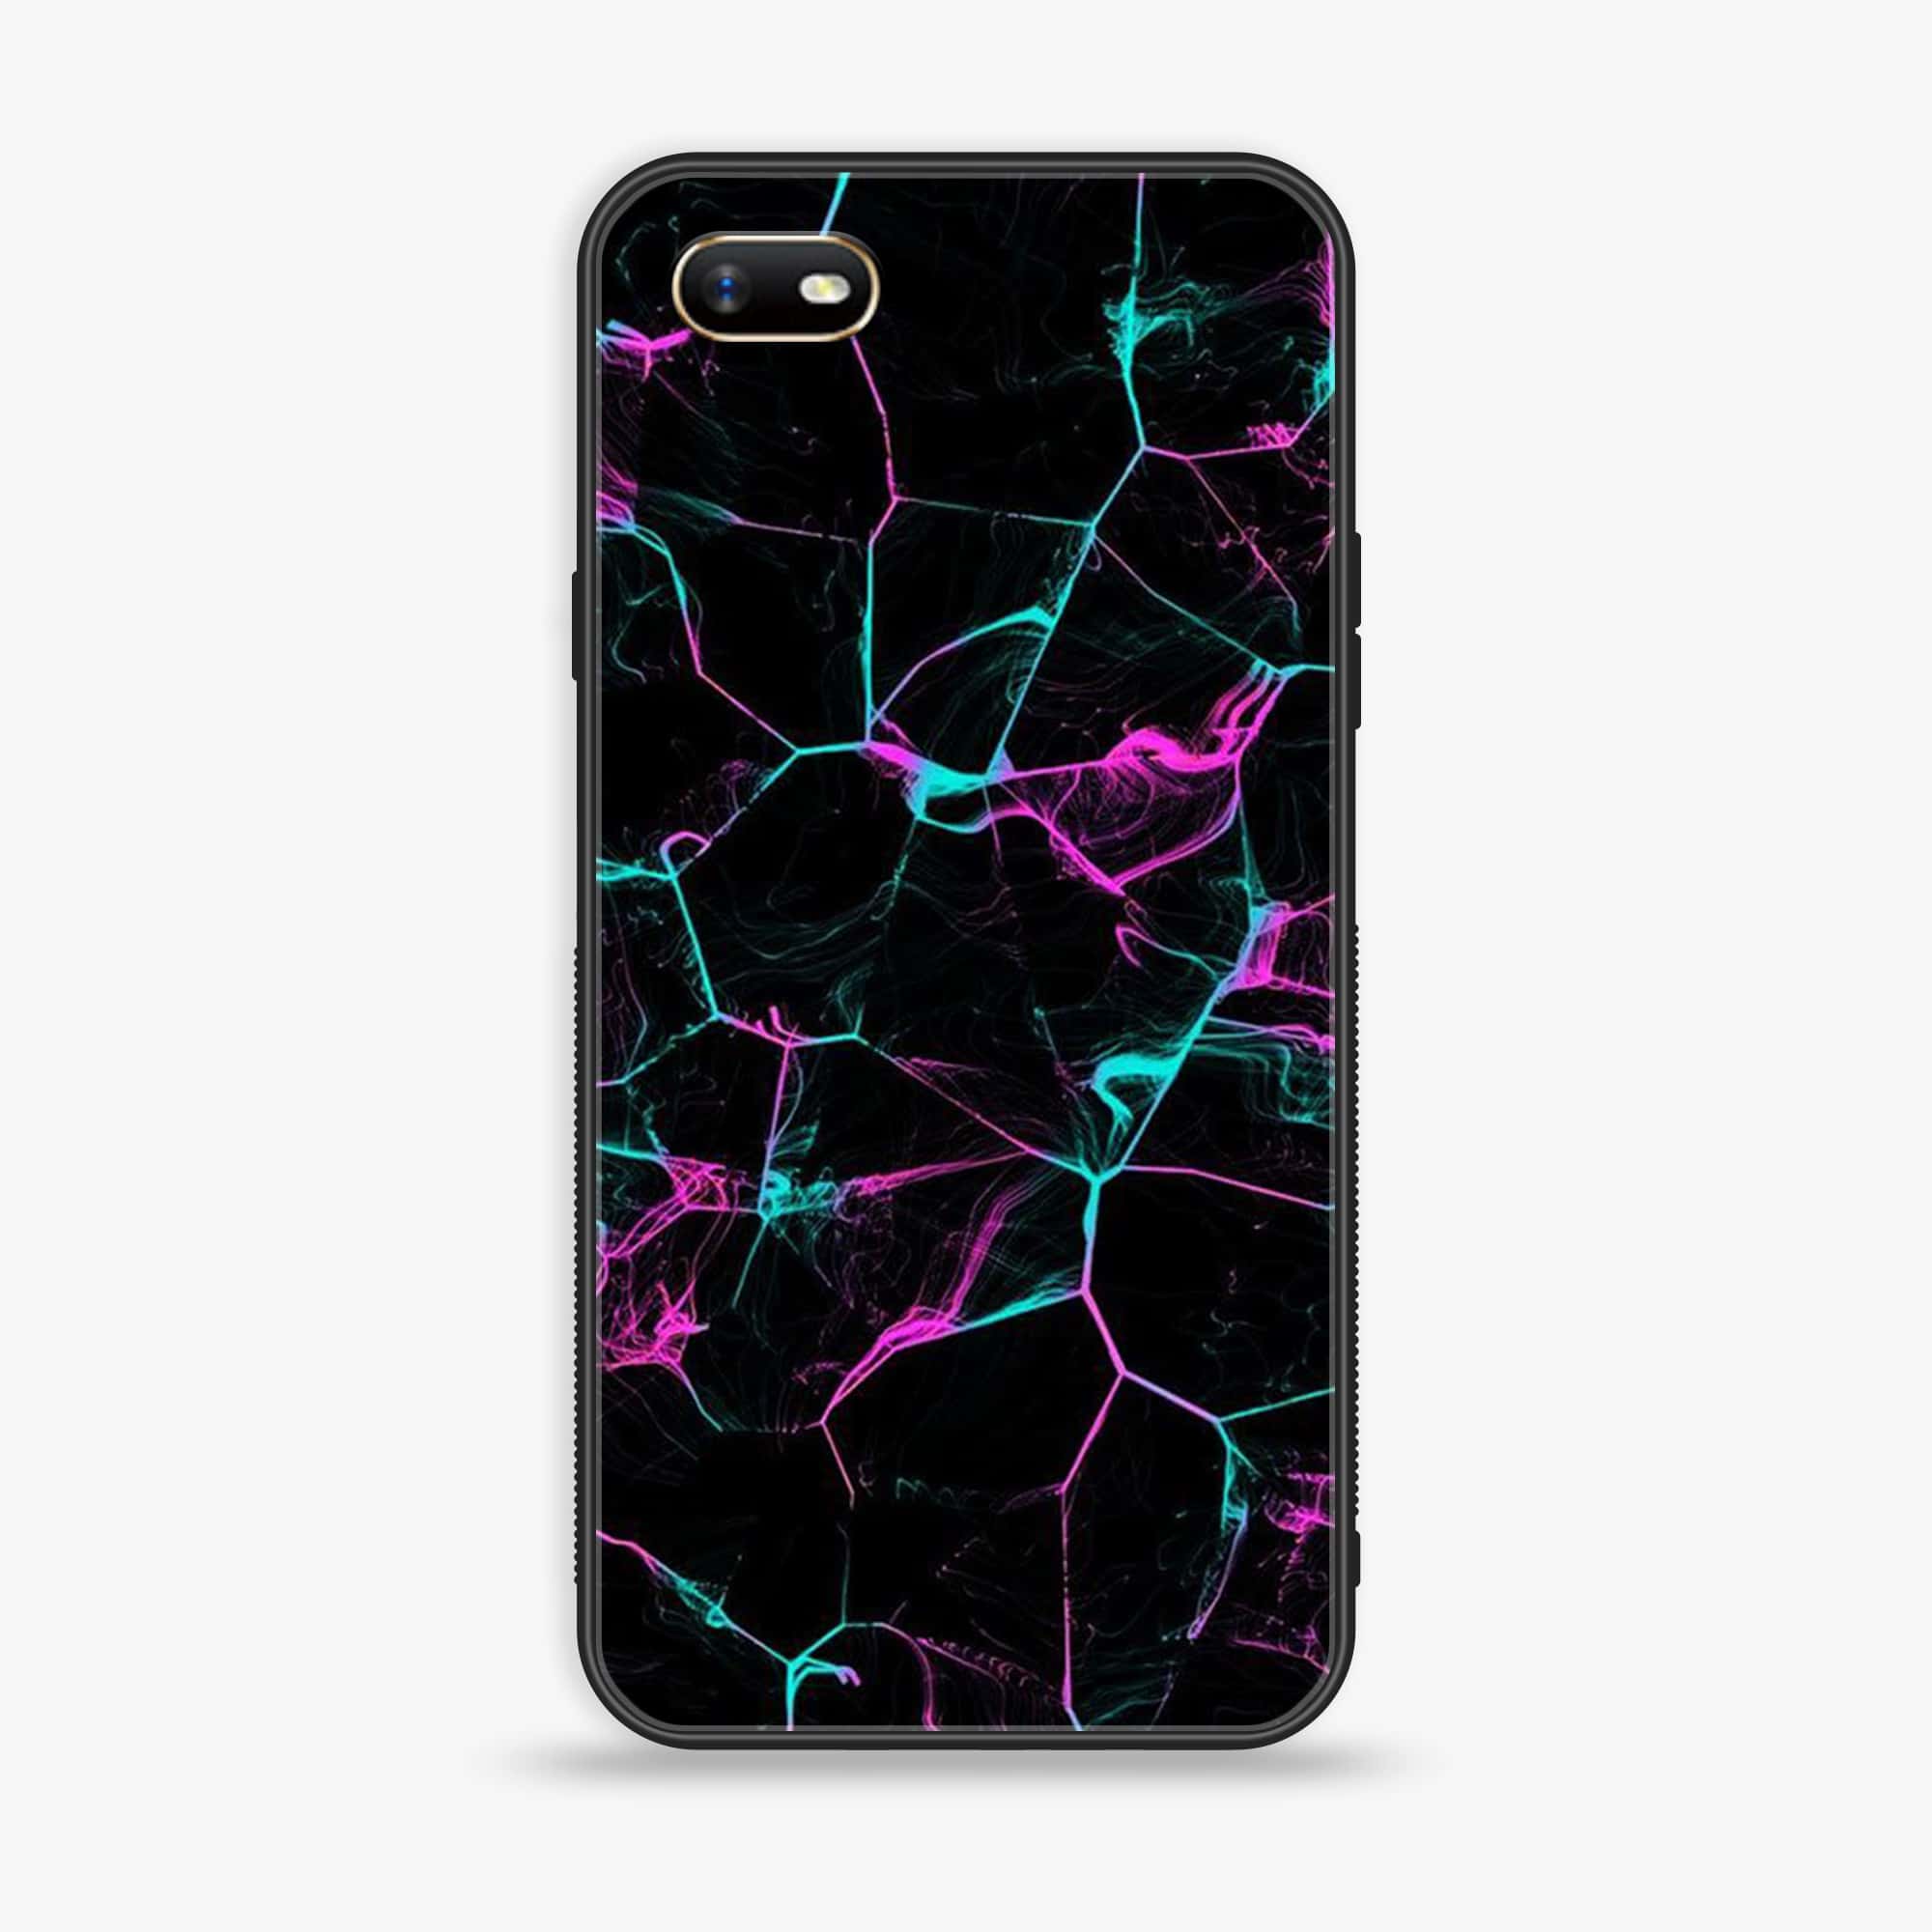 Oppo A1k  - Black Marble Series - Premium Printed Glass soft Bumper shock Proof Case